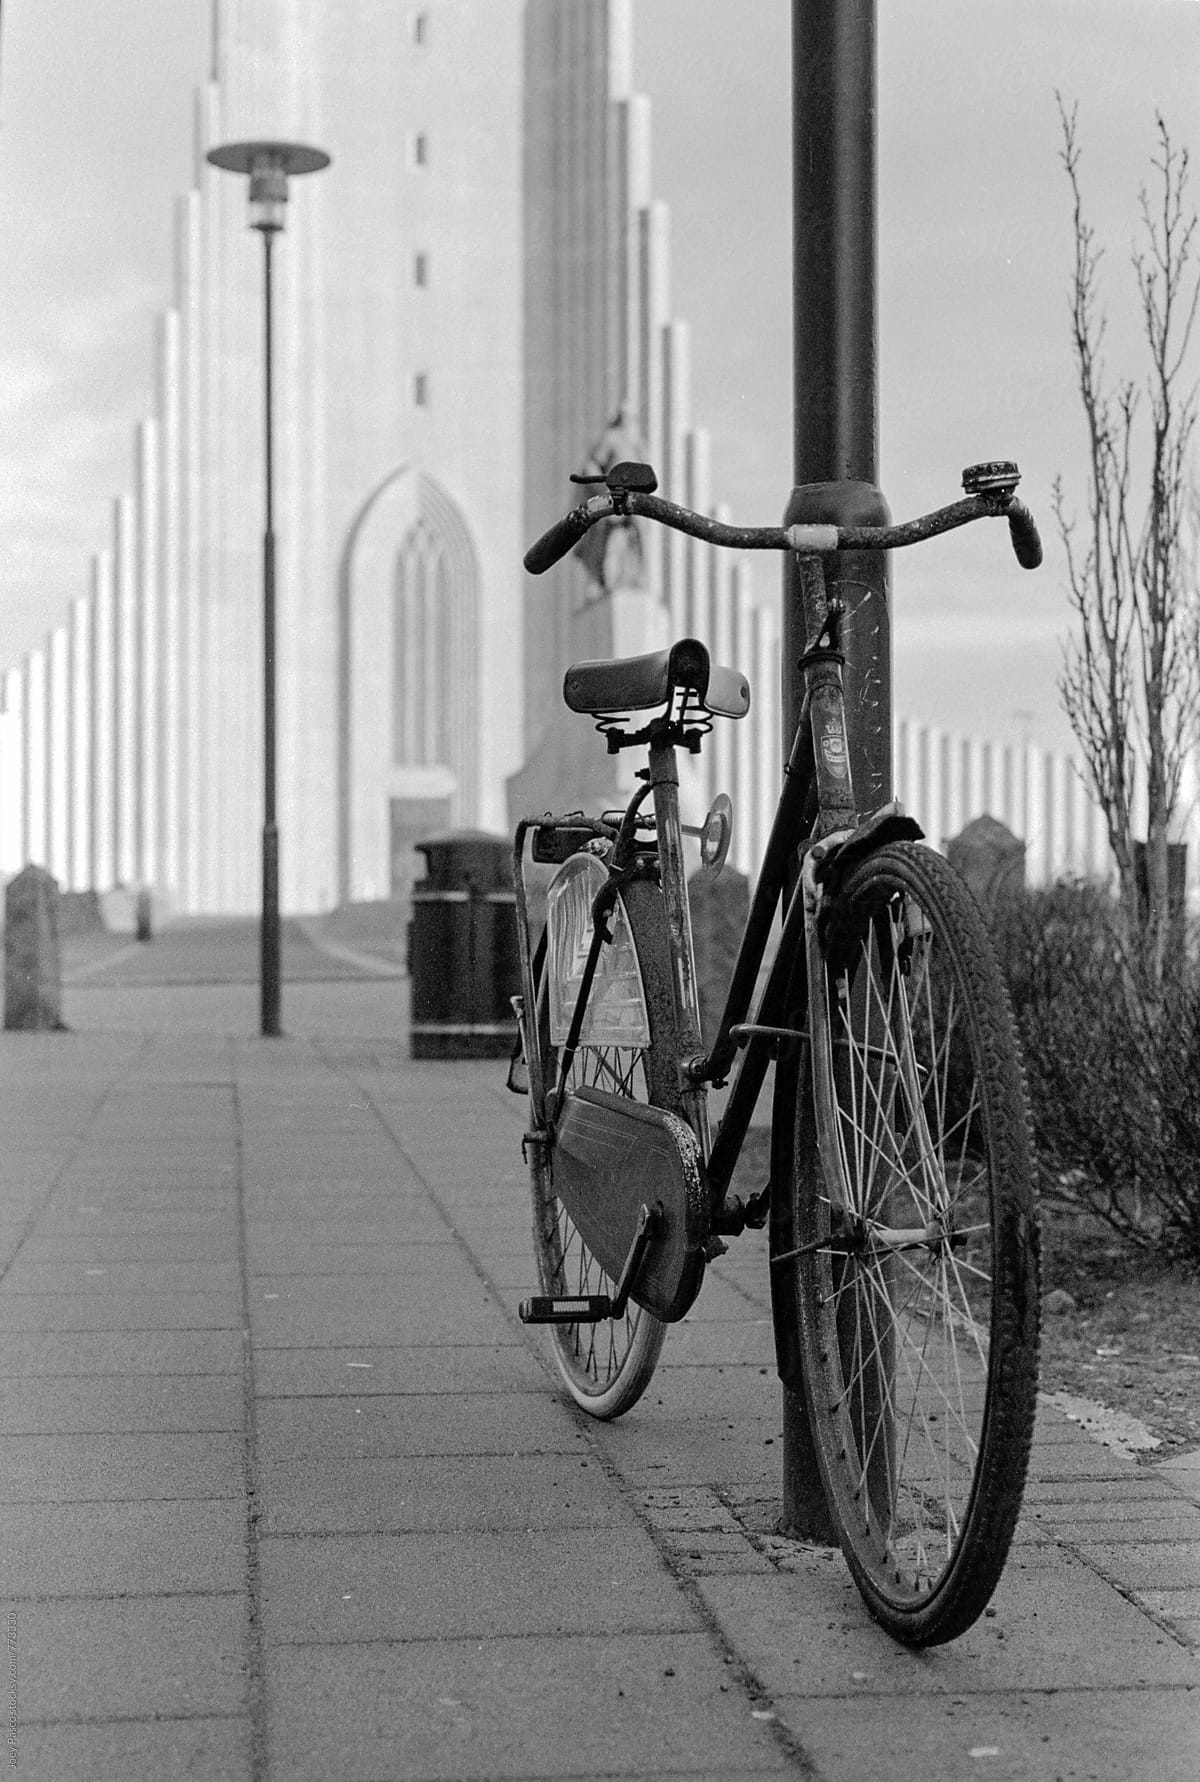 Rusted bicycle in front of Hallgrímskirkja Church, Iceland